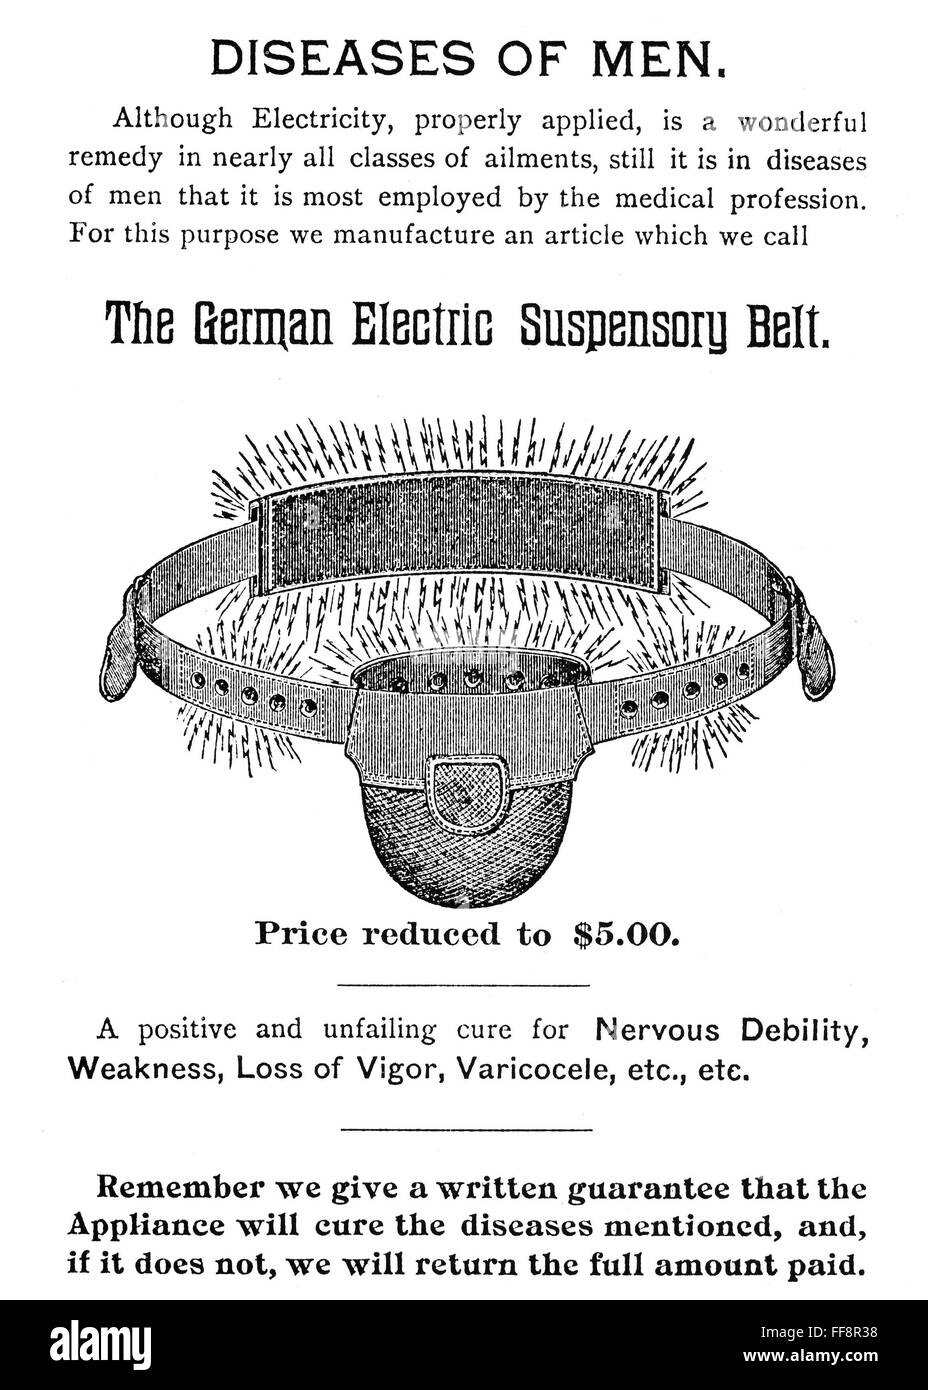 PATENT MEDICINE PAMPHLET. /nPage from a 19th century American pamphlet advertising the German Electric Suspensory Belt as a cure for 'nervous debility' and 'loss of vigor,' discreet terms for impotence. Stock Photo